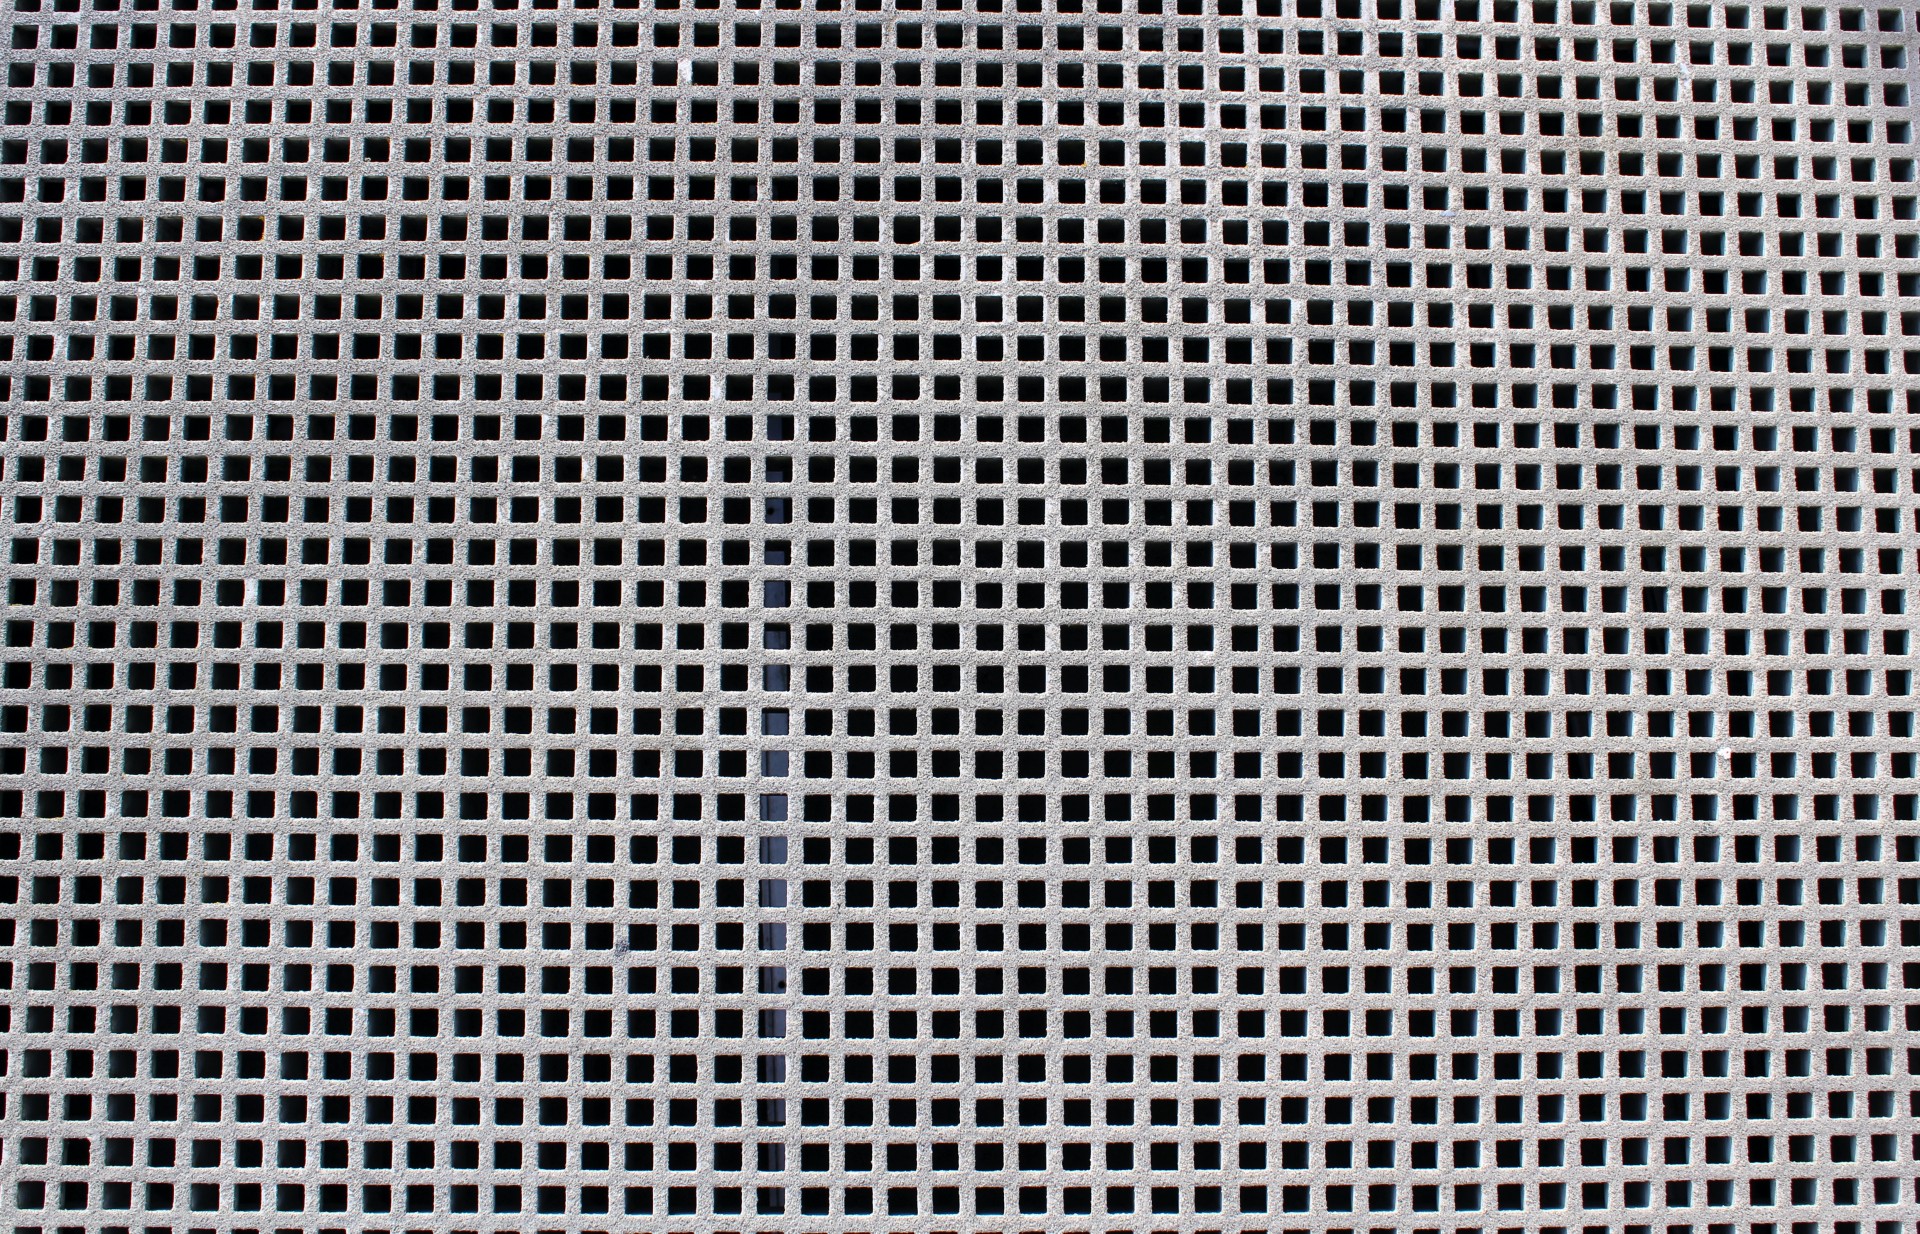 A grate made of geometric squares for use as a background.